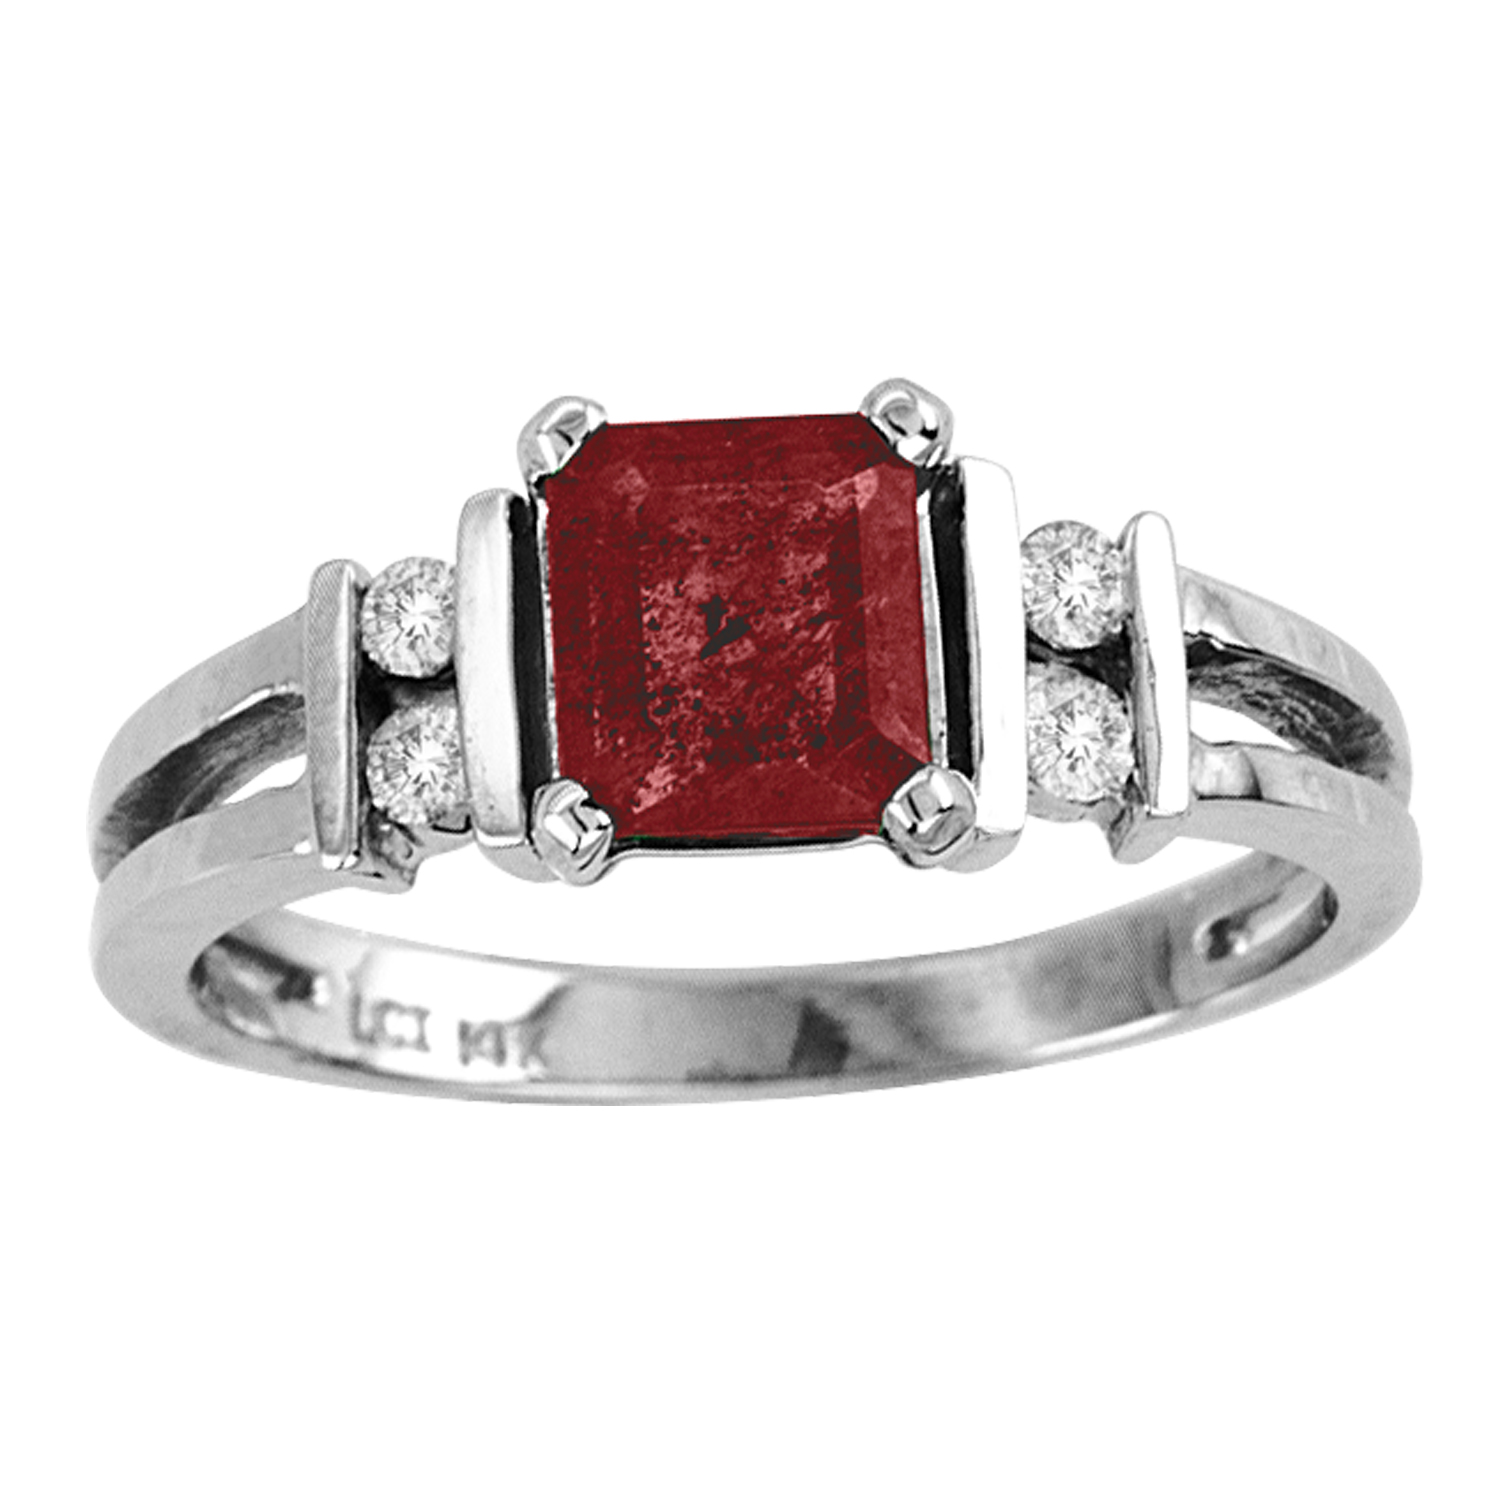 1.10cttw Diamond and Natural Heated Ruby Ring set in 14k Gold 